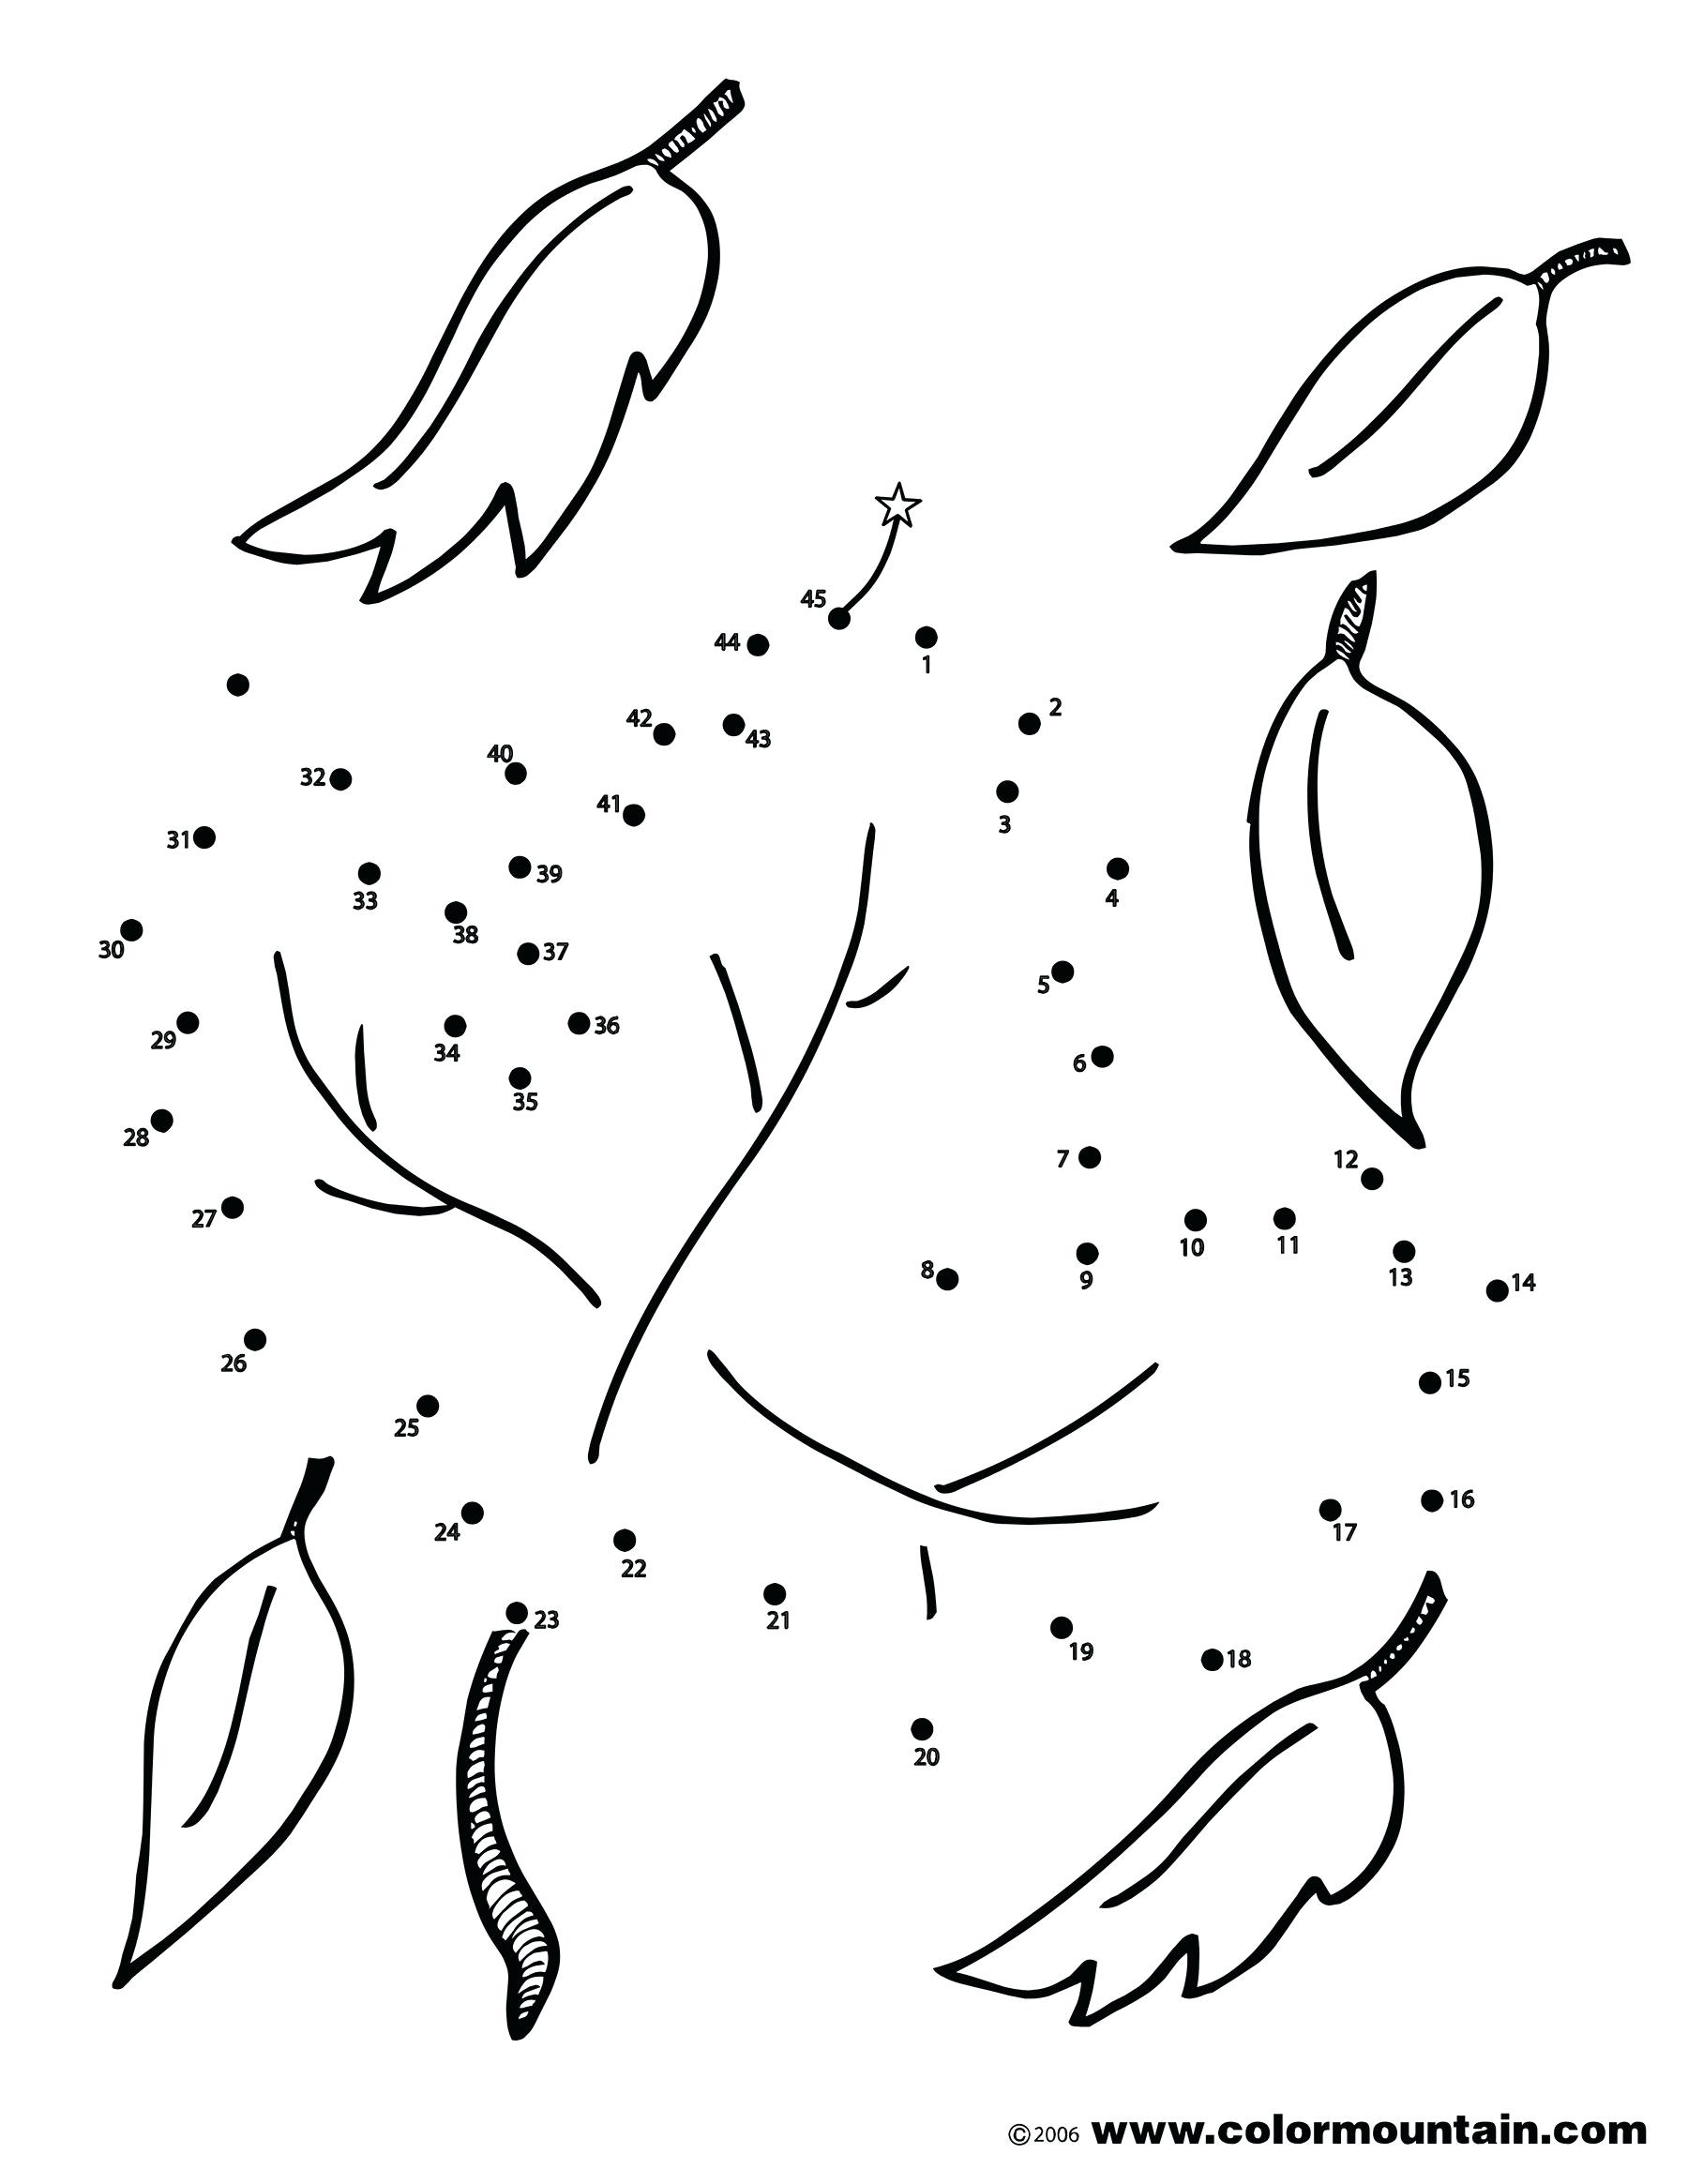 Coloring Pages : Coloring Hard Dot To Dots Thanksgiving Color By ...